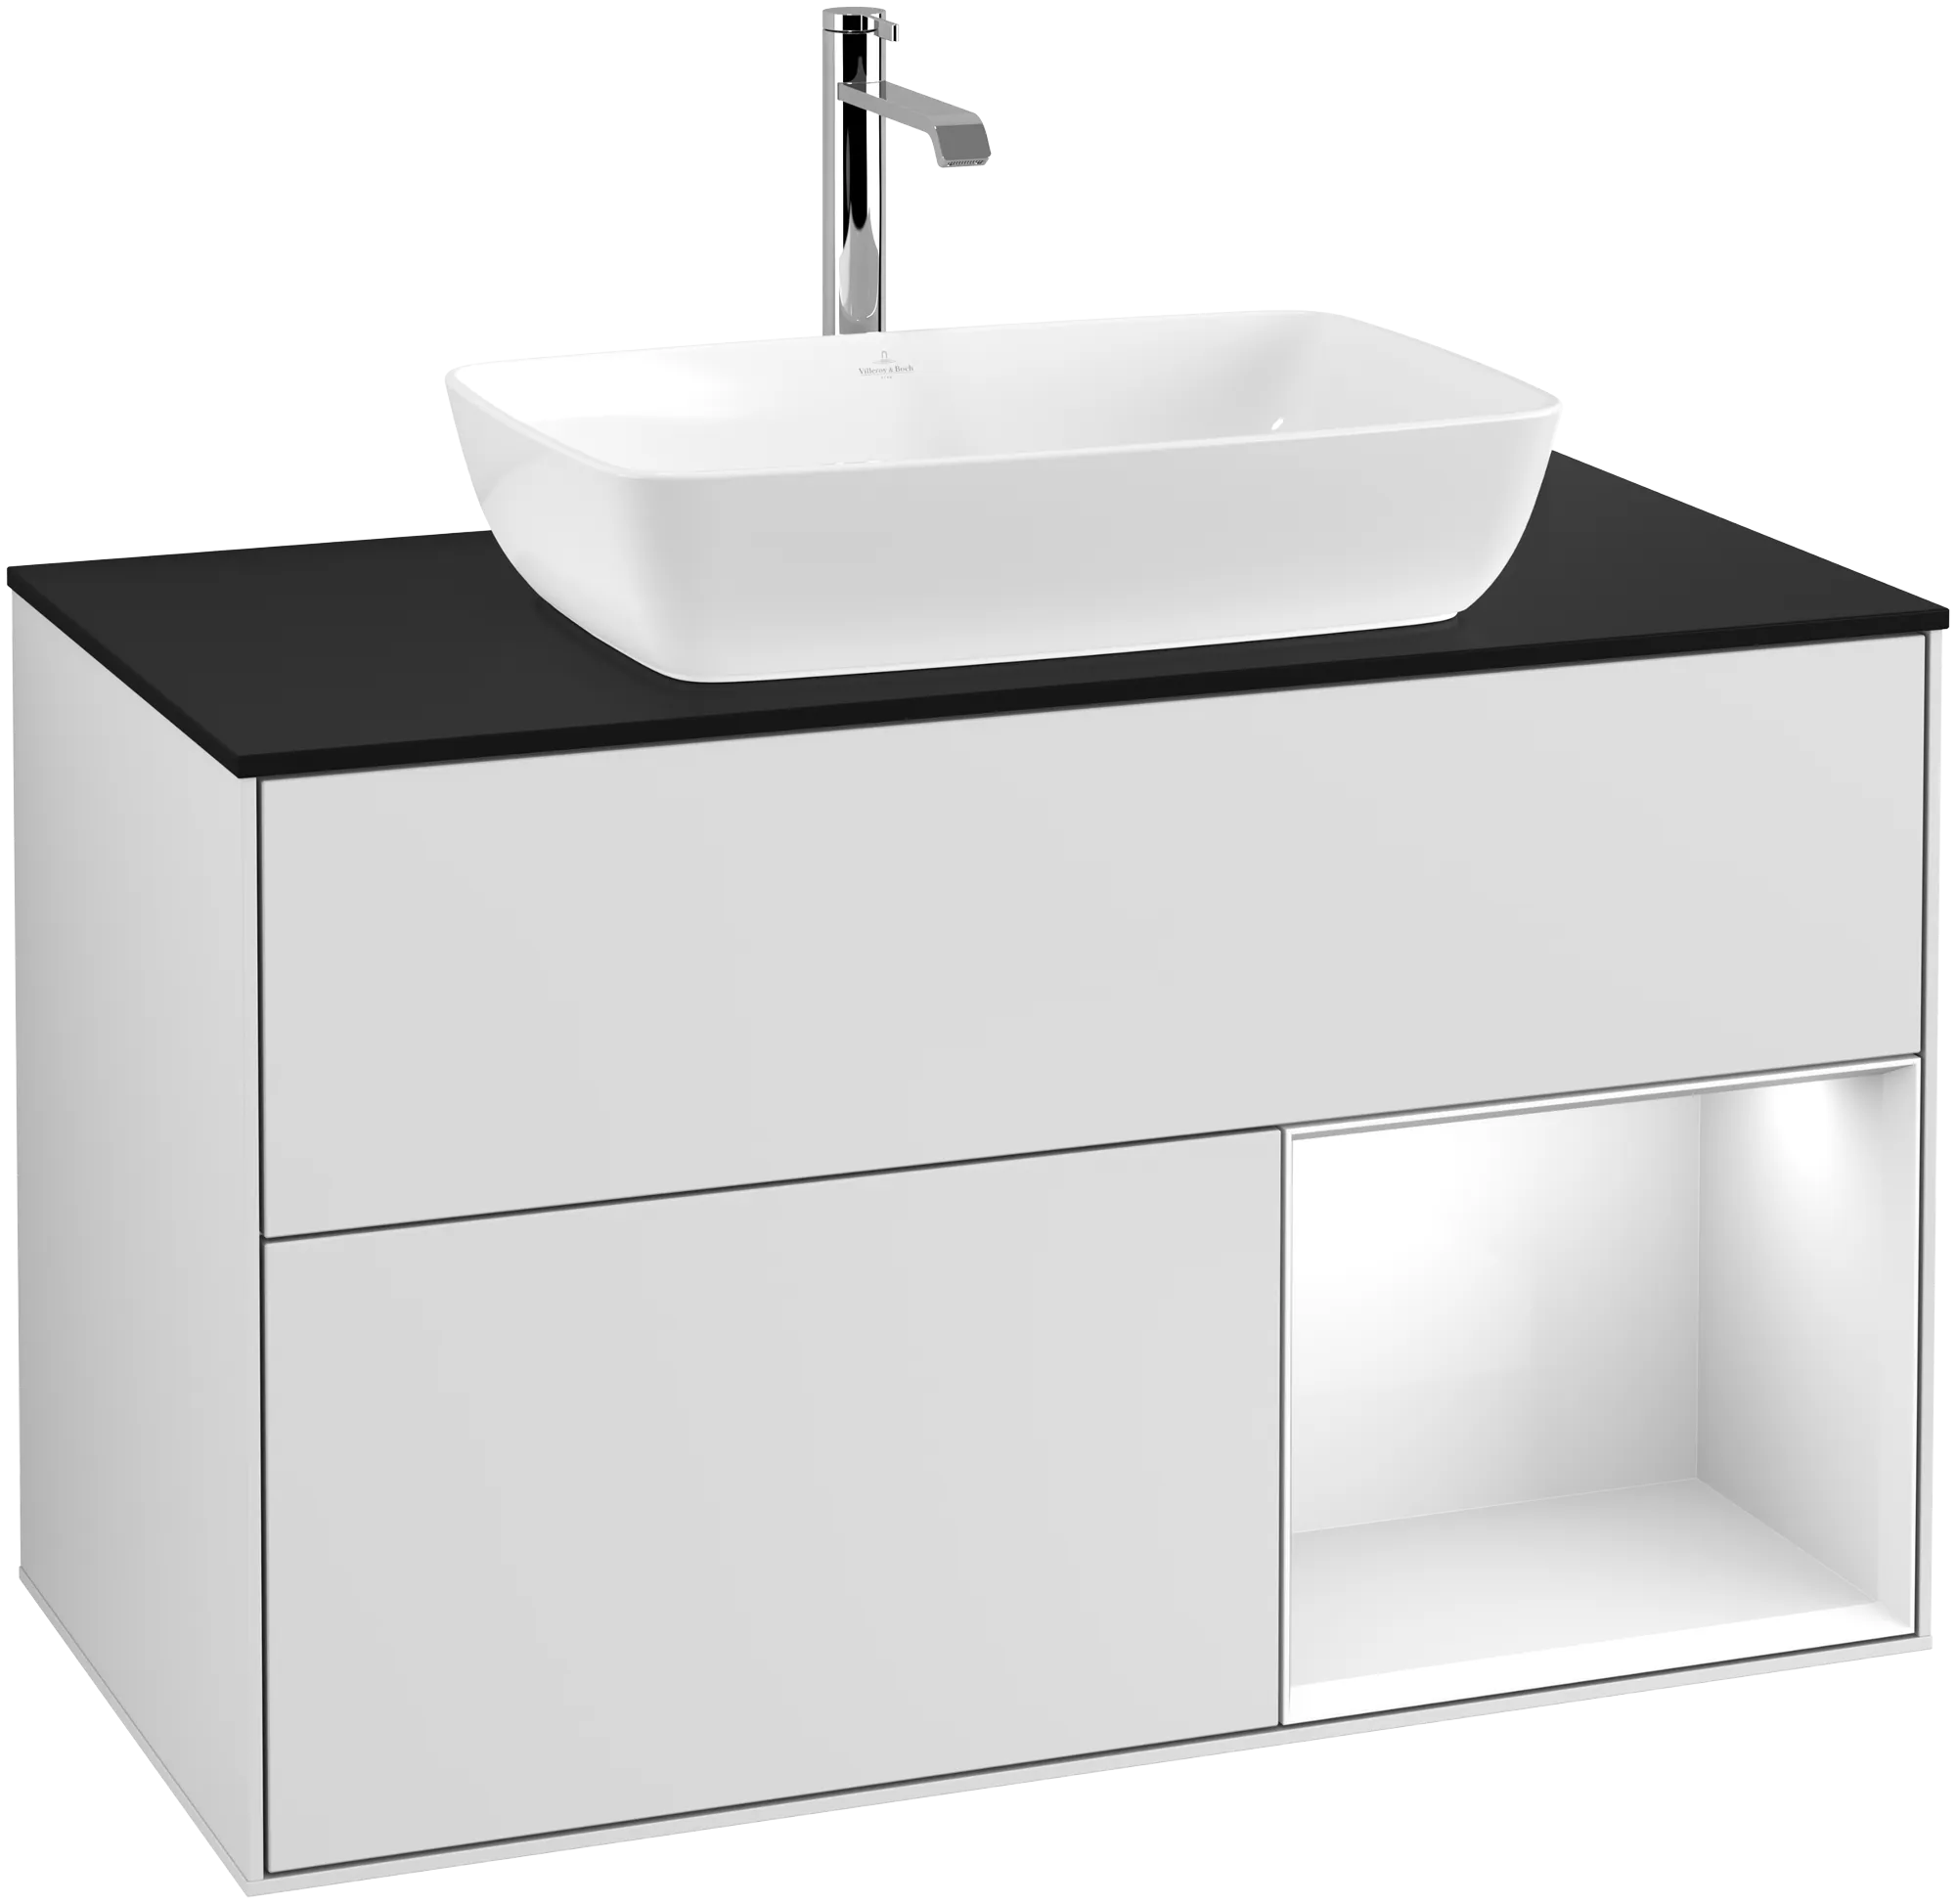 Зображення з  VILLEROY BOCH Finion Vanity unit, with lighting, 2 pull-out compartments, 1000 x 603 x 501 mm, White Matt Lacquer / Glossy White Lacquer / Glass Black Matt #G782GFMT